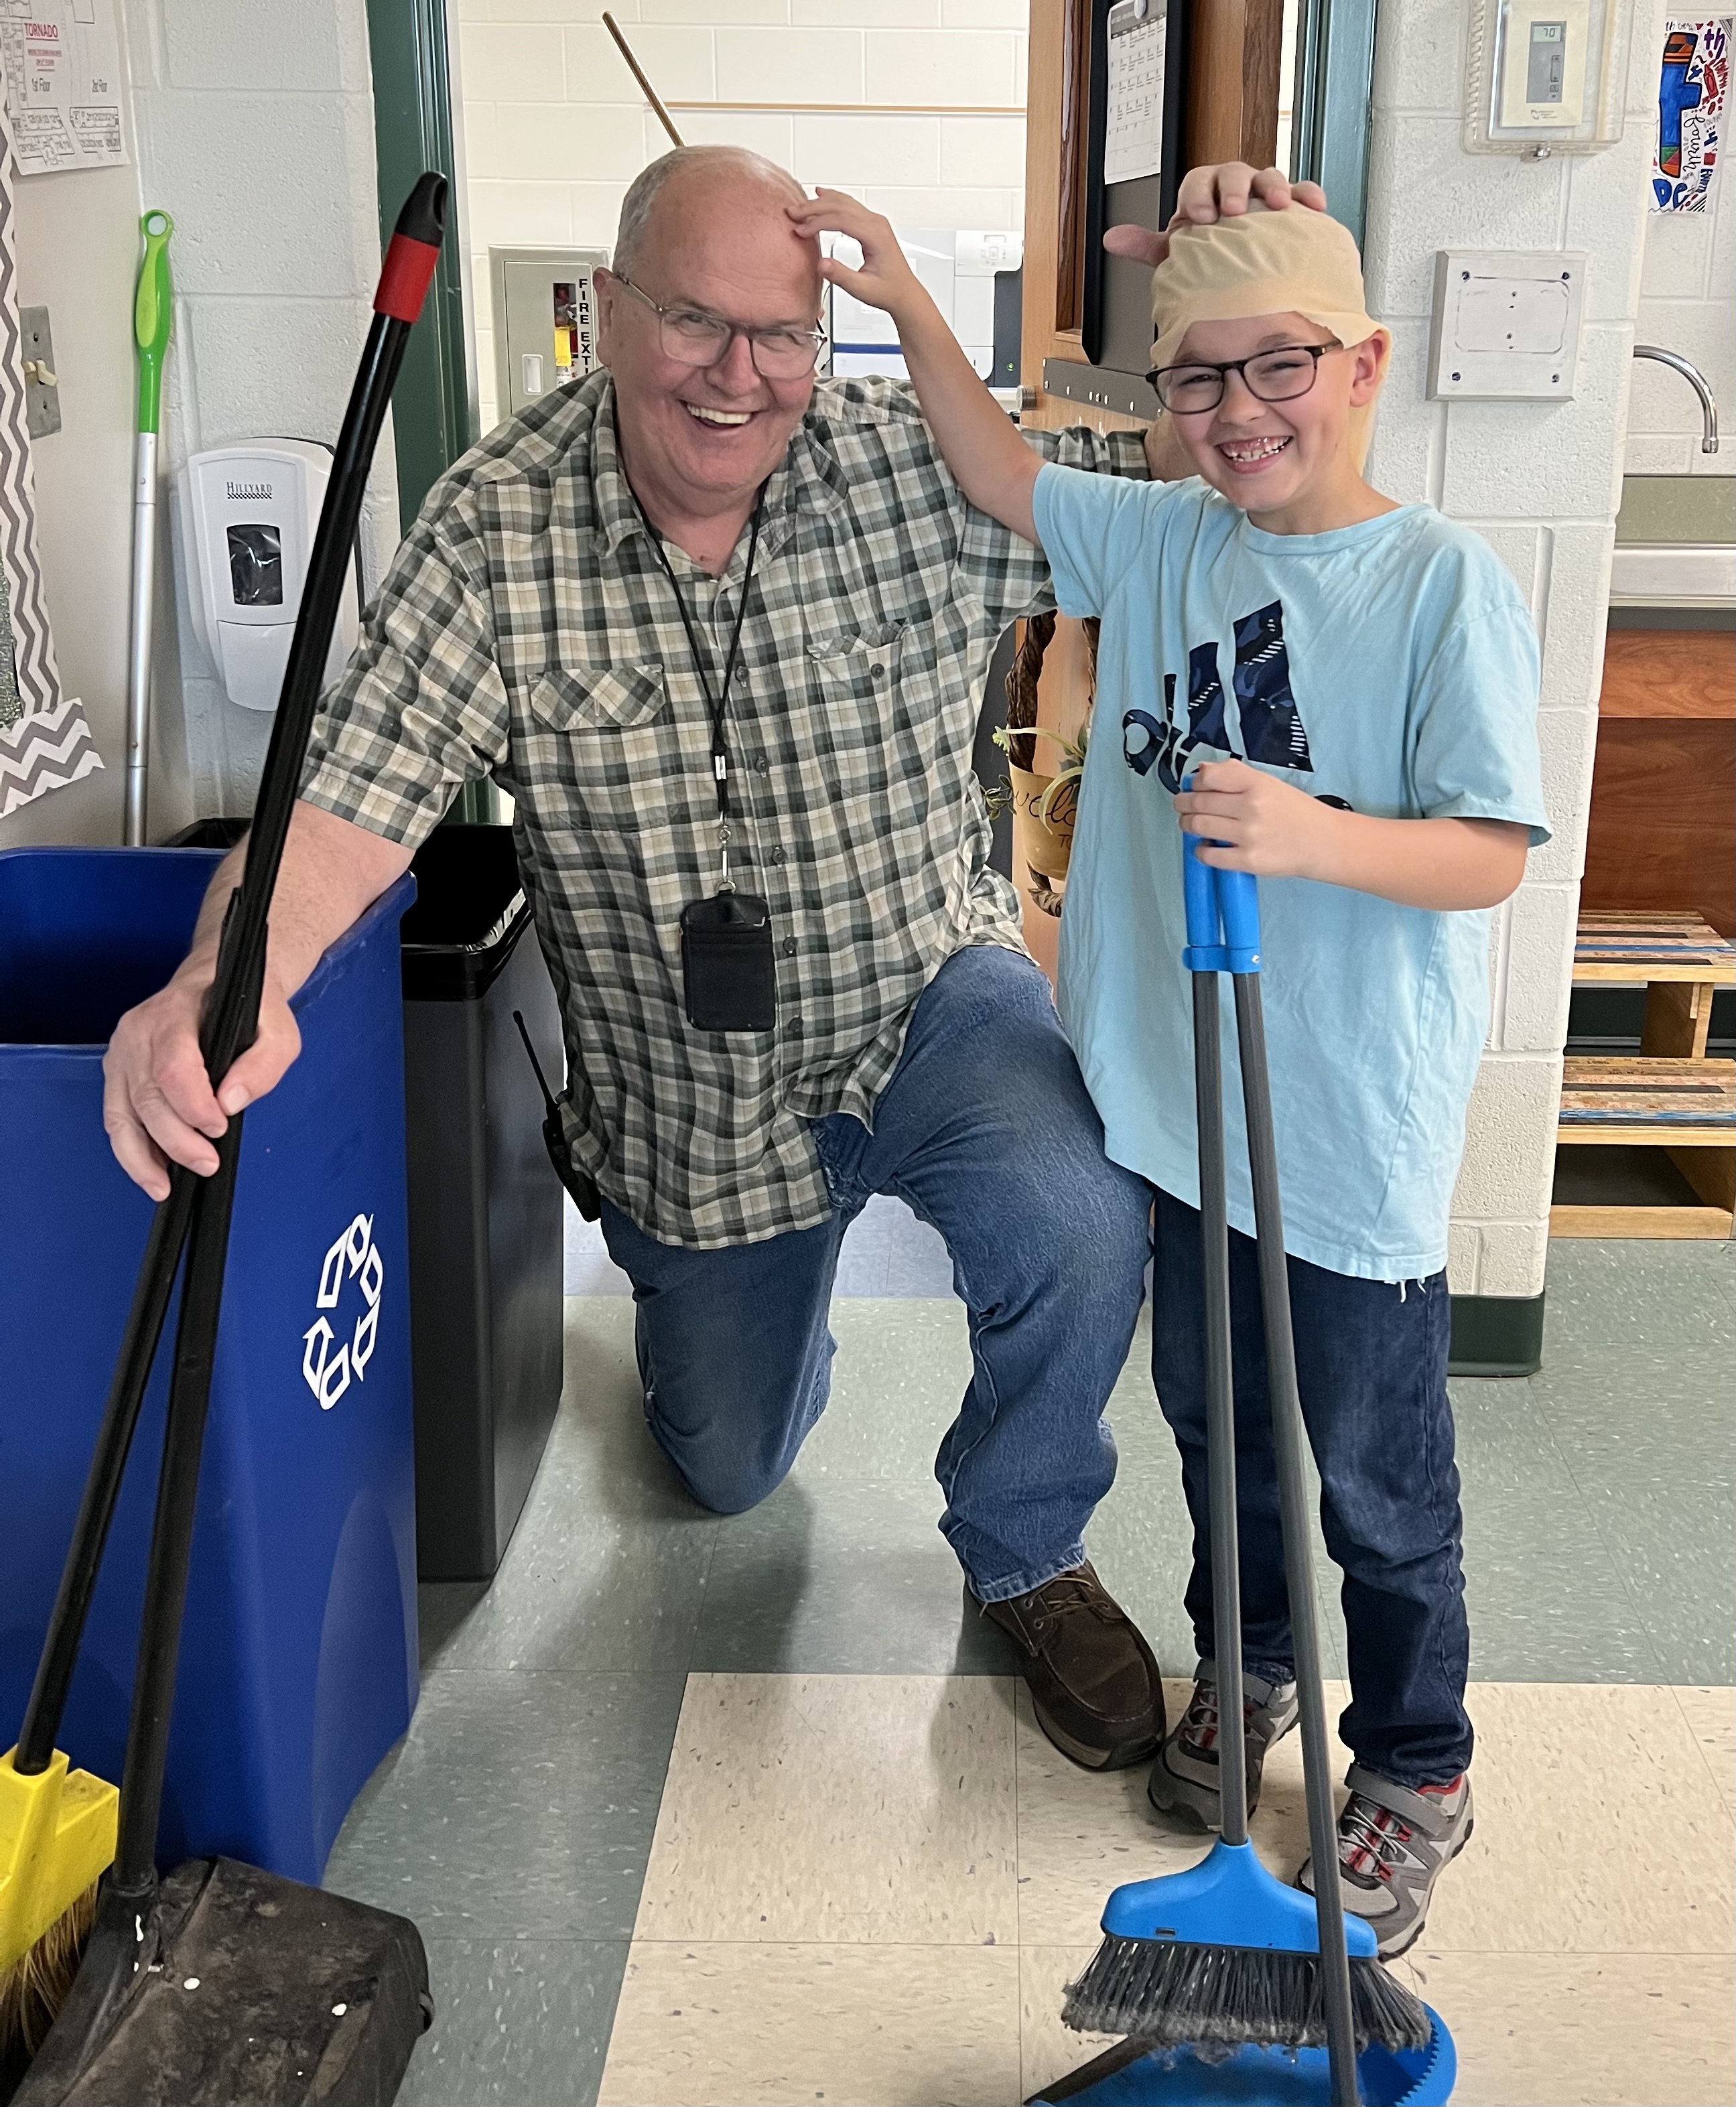 Dan Gallagher-custodian with a student who dressed up like Dan